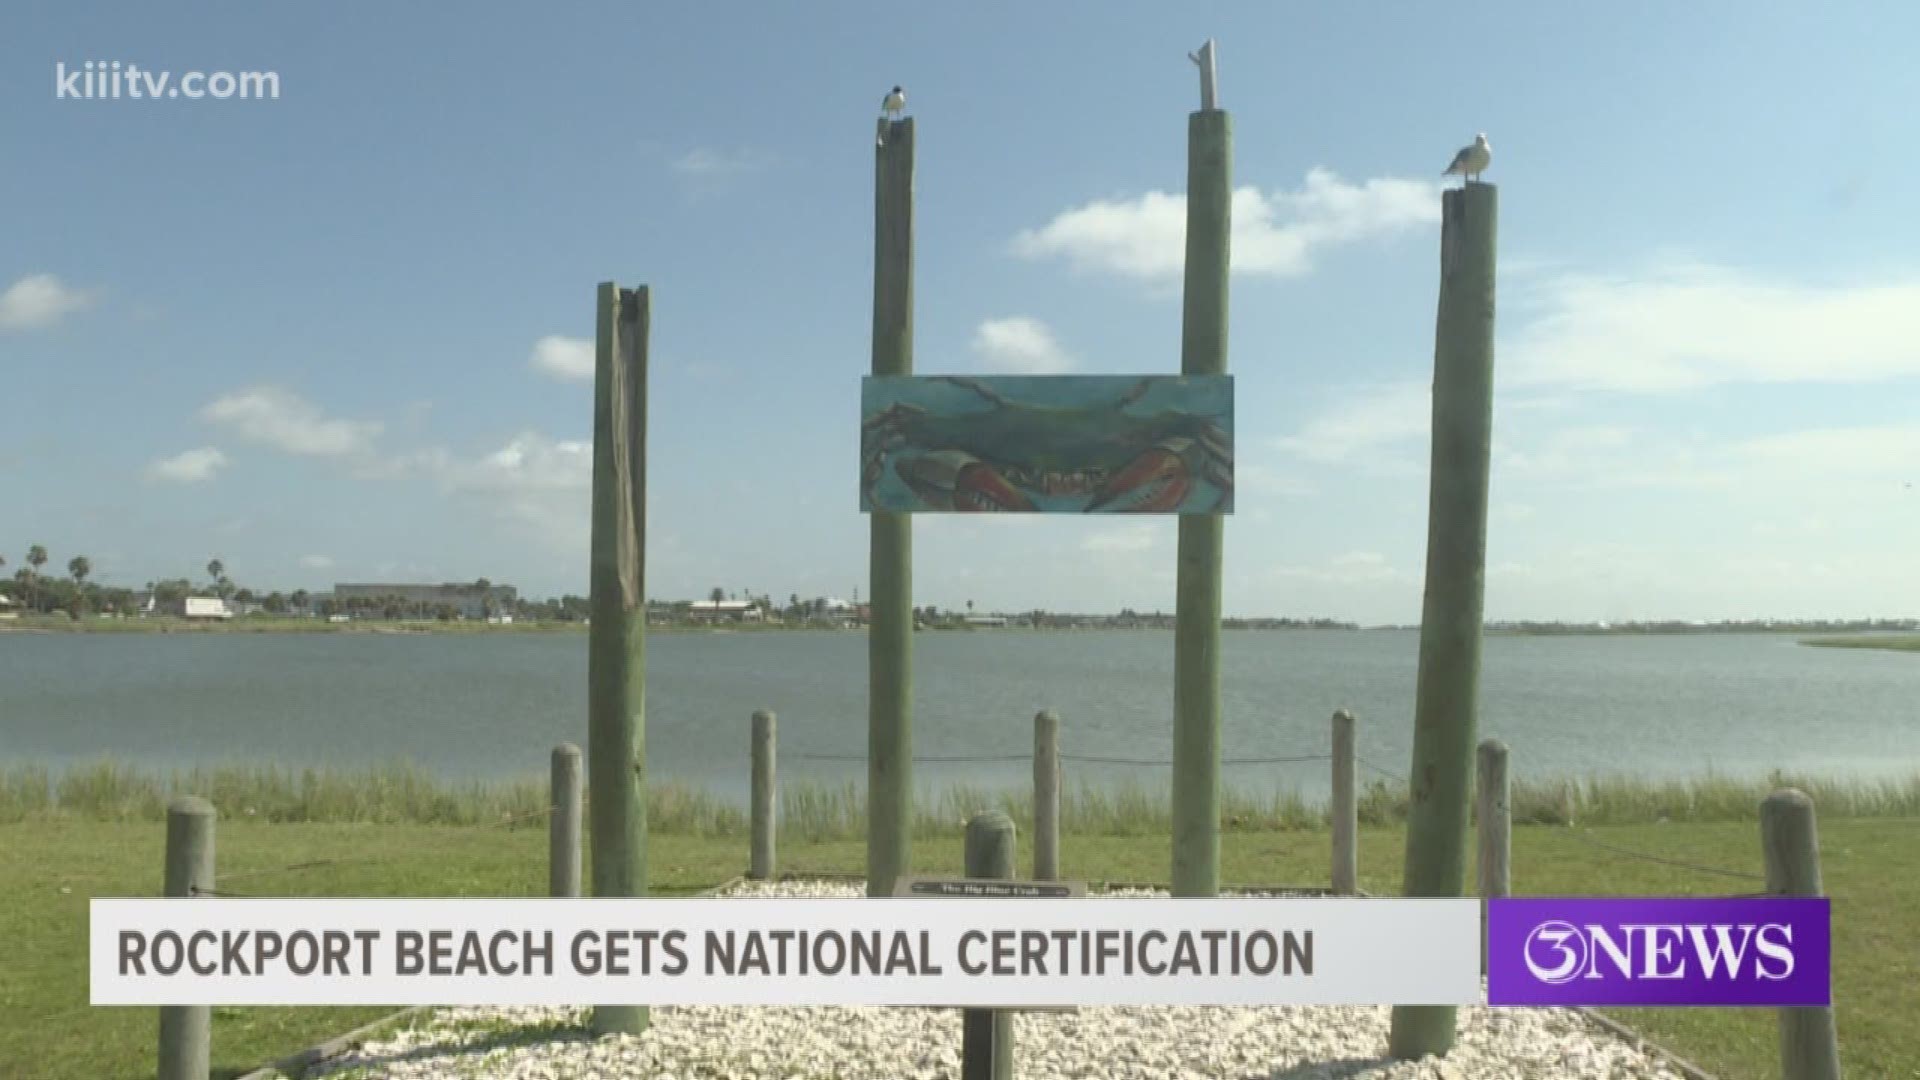 The City of Rockport received a big honor Wednesday as the Clean Beaches Coalition dubbed Rockport Beach a "Blue Wave Beach".